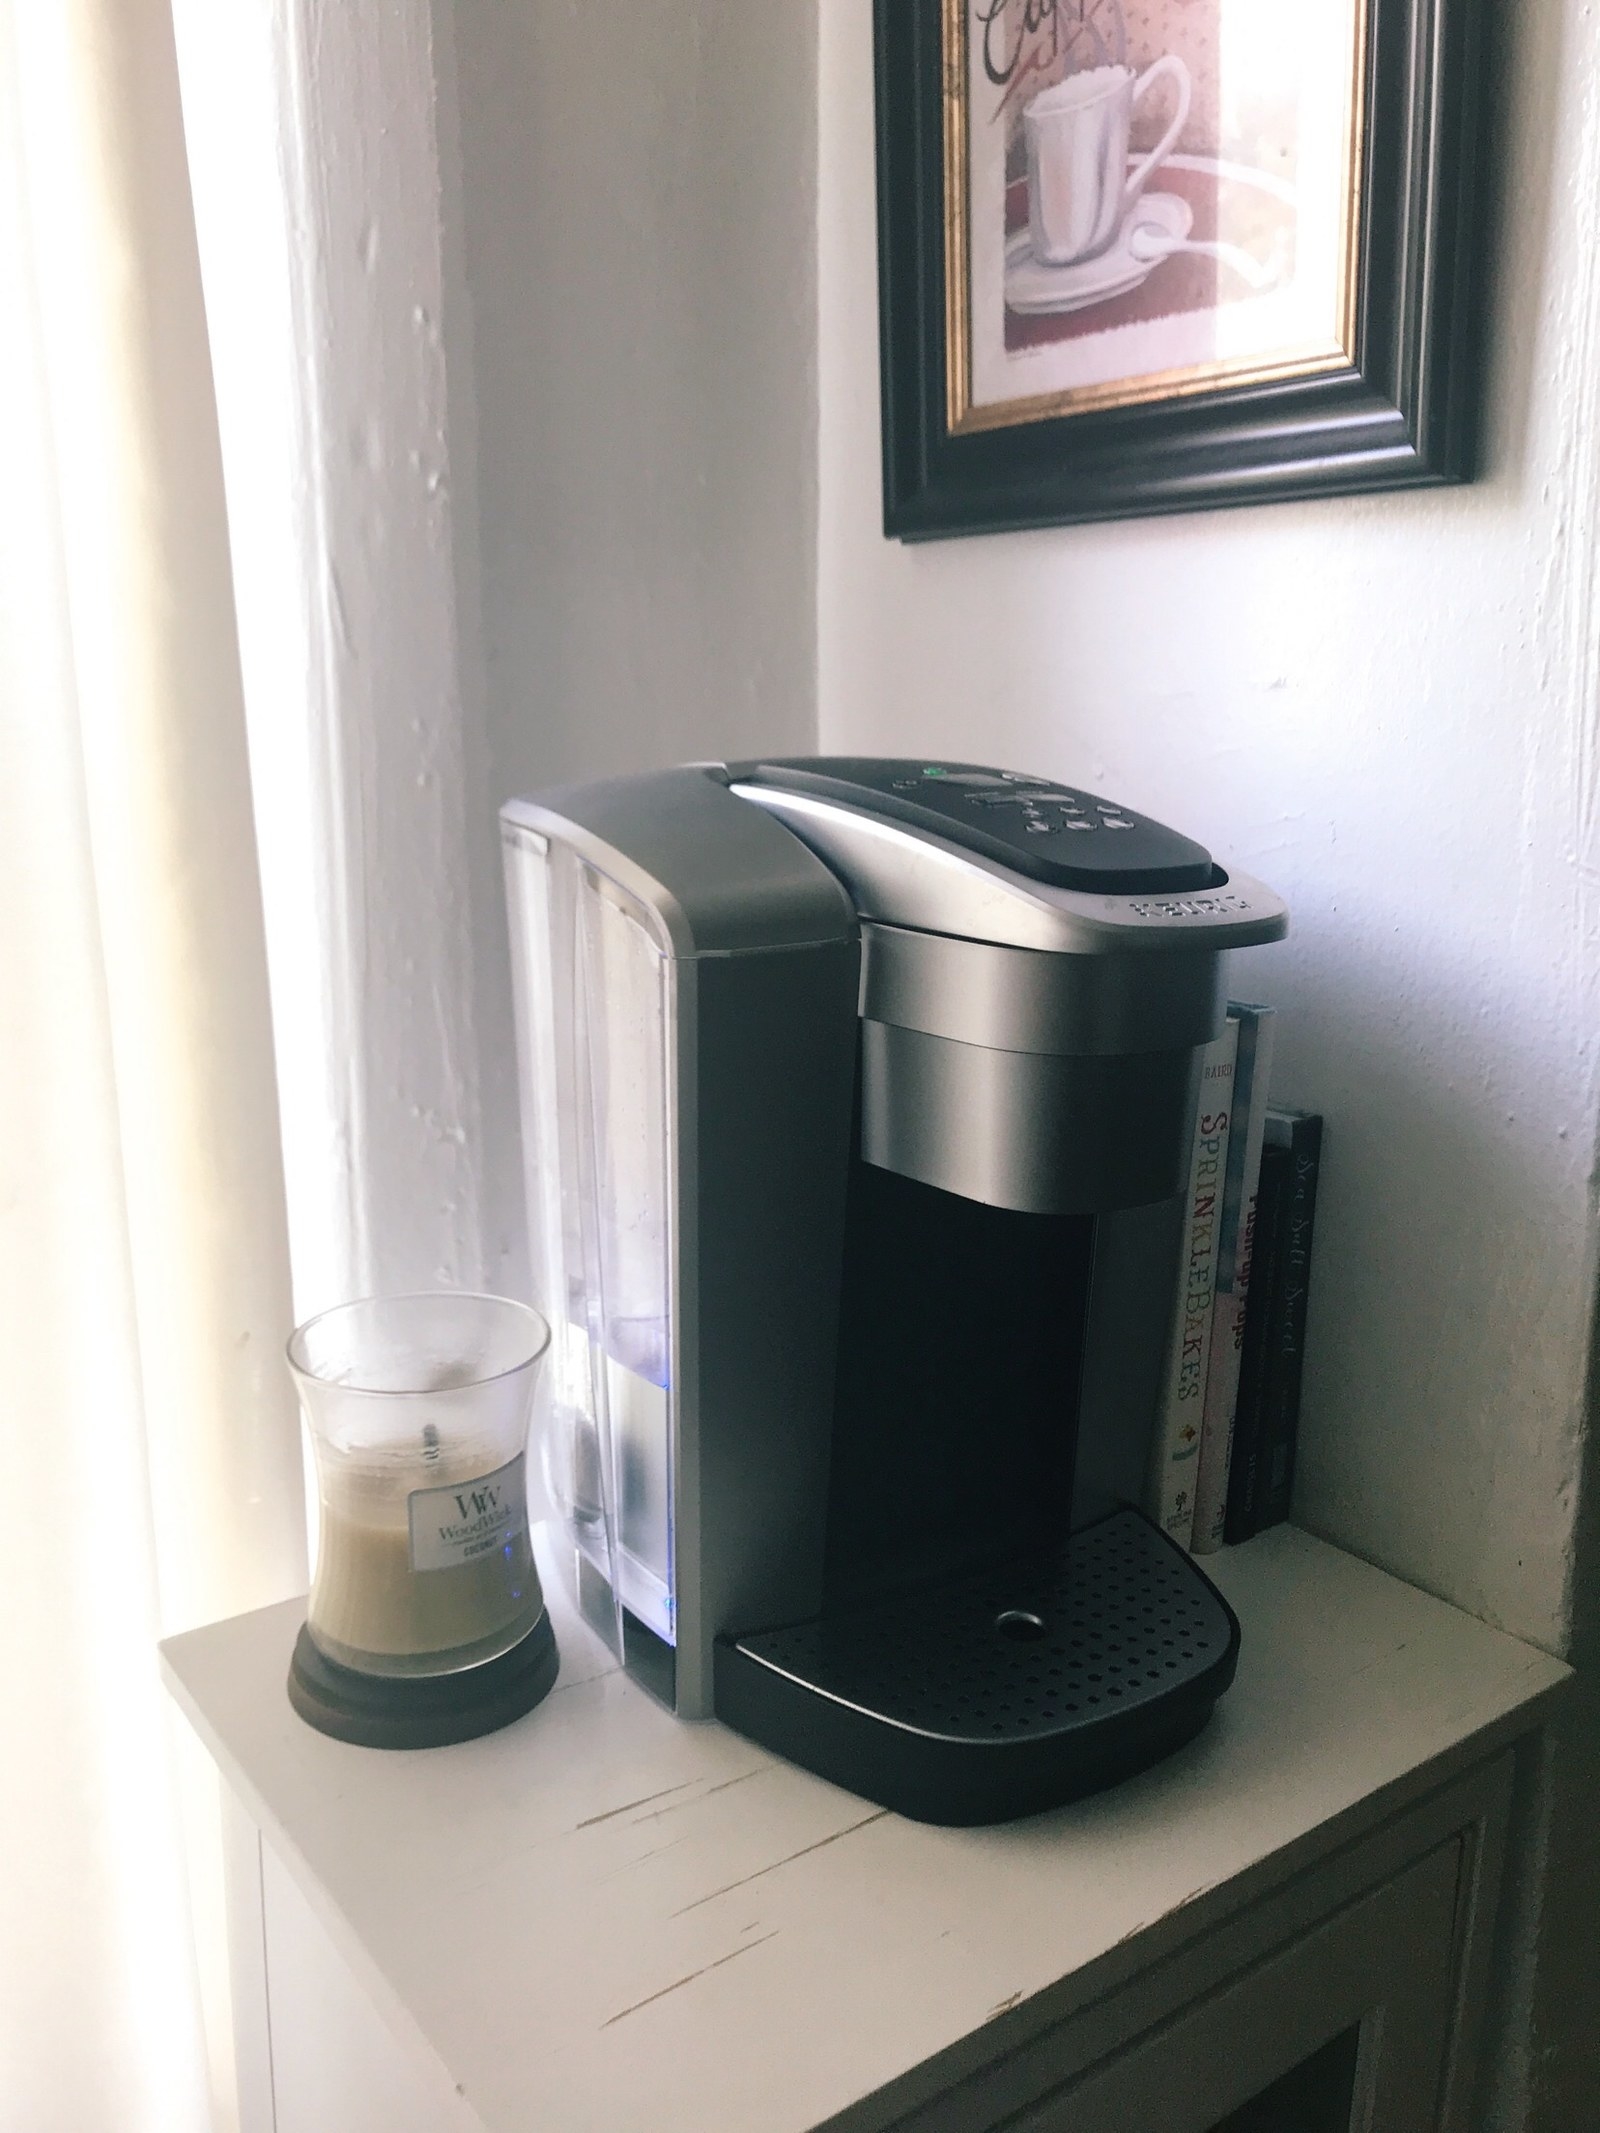 Keurig's New Coffeemaker Has An Iced-Coffee Feature, And Yup, Heaven Is Real